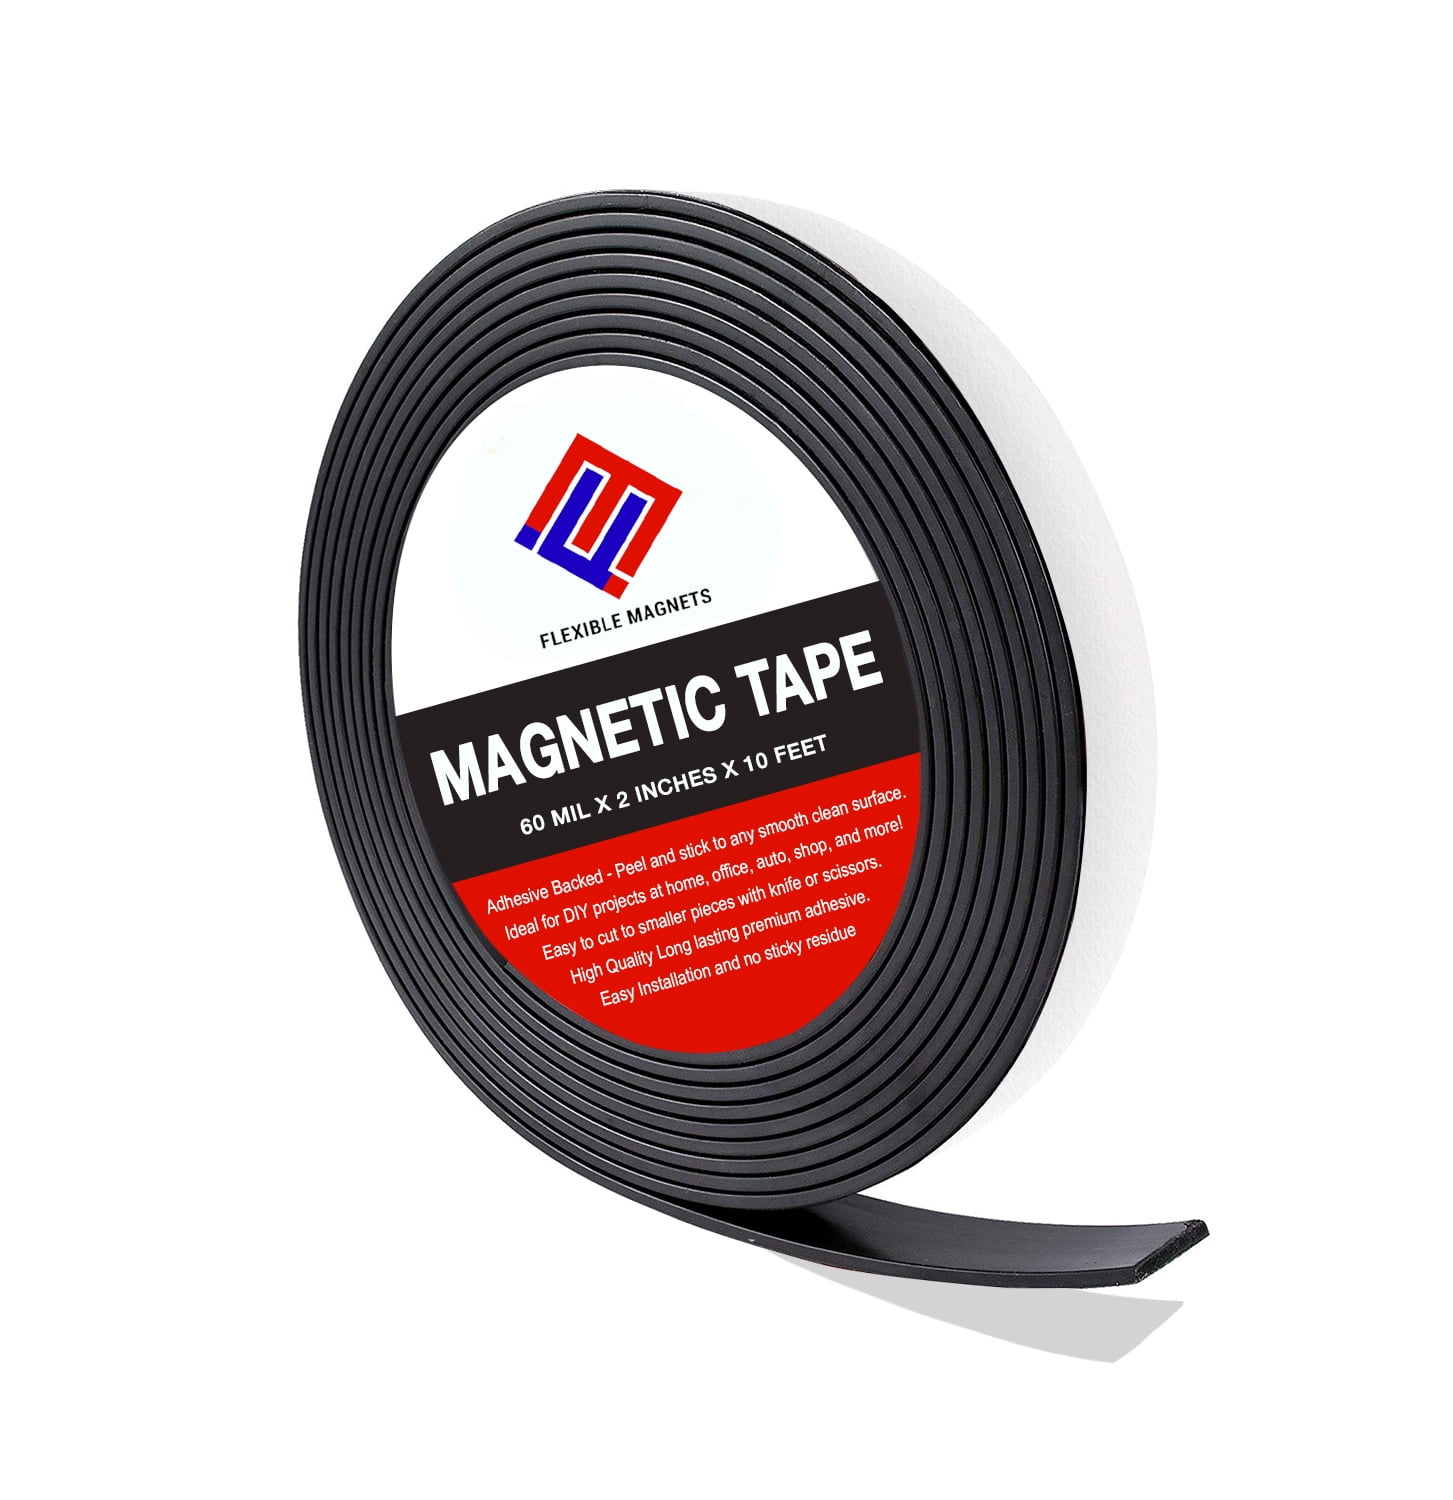 Self ADHESIVE MAGNETIC FLEXIBLE tape from the magnetic Shop 